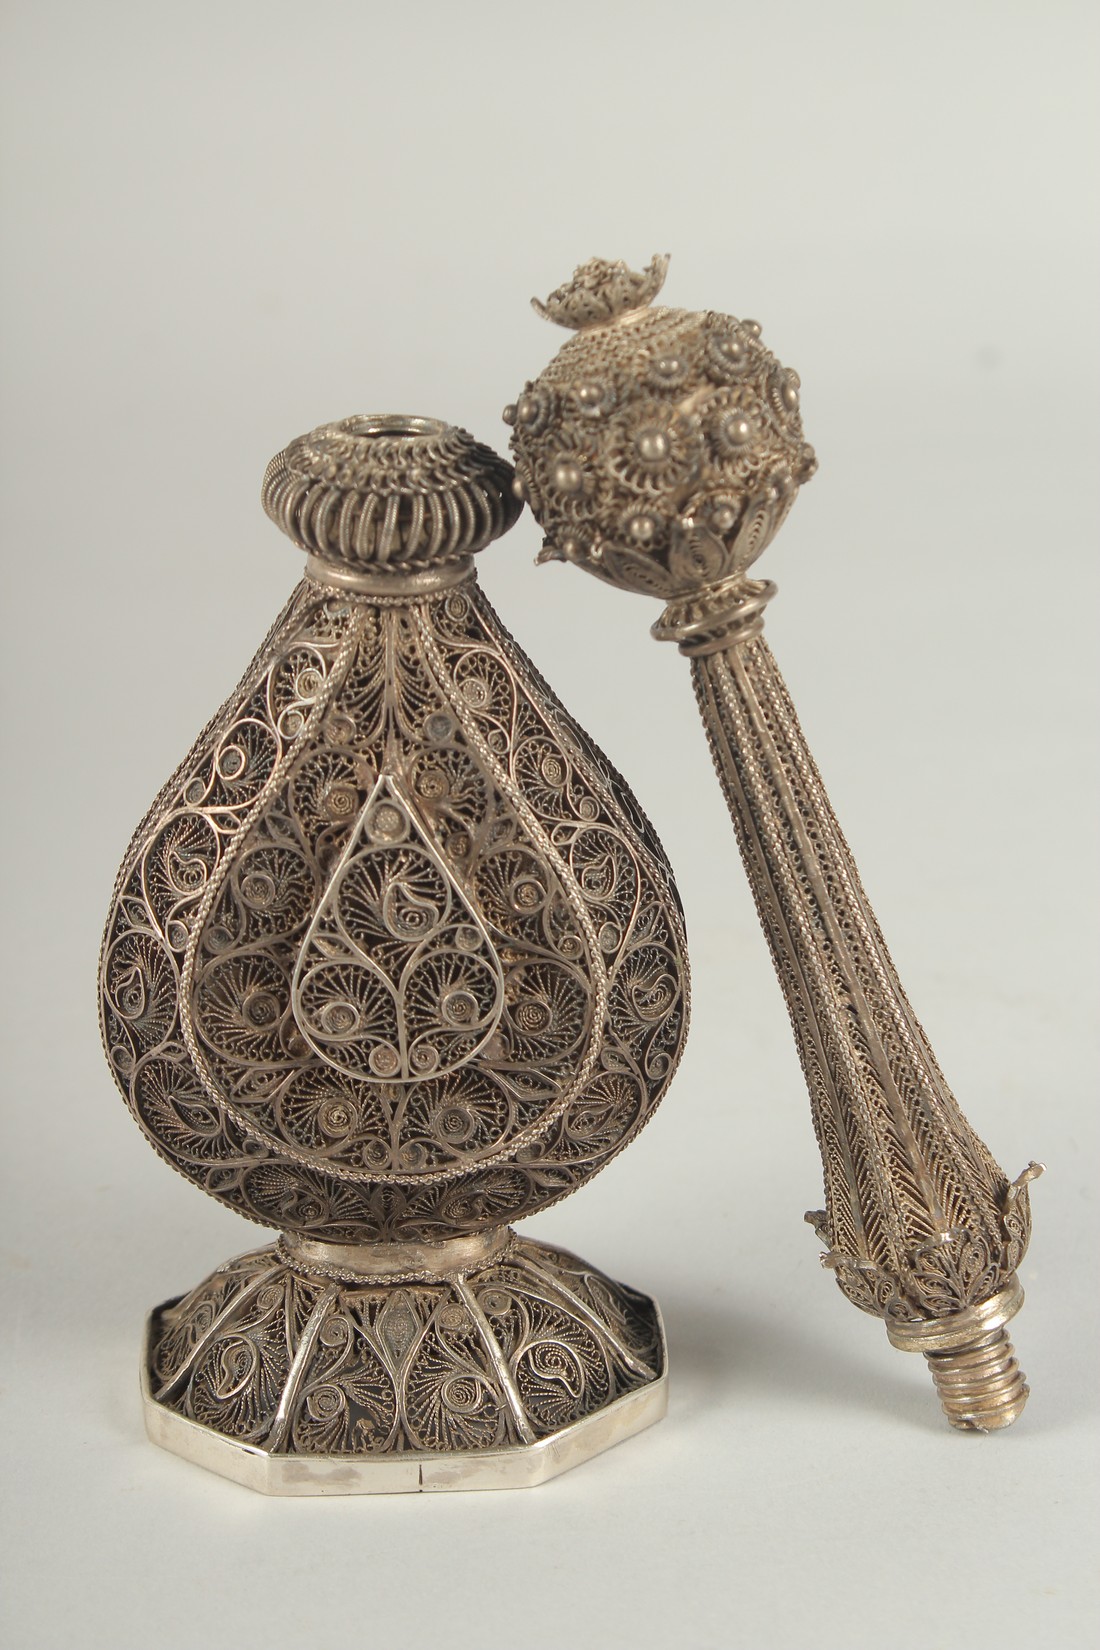 A FINE 19TH CENTURY INDIAN SILVER FILIGREE ROSEWATER SPRINKLER, 27cm high. - Image 10 of 10